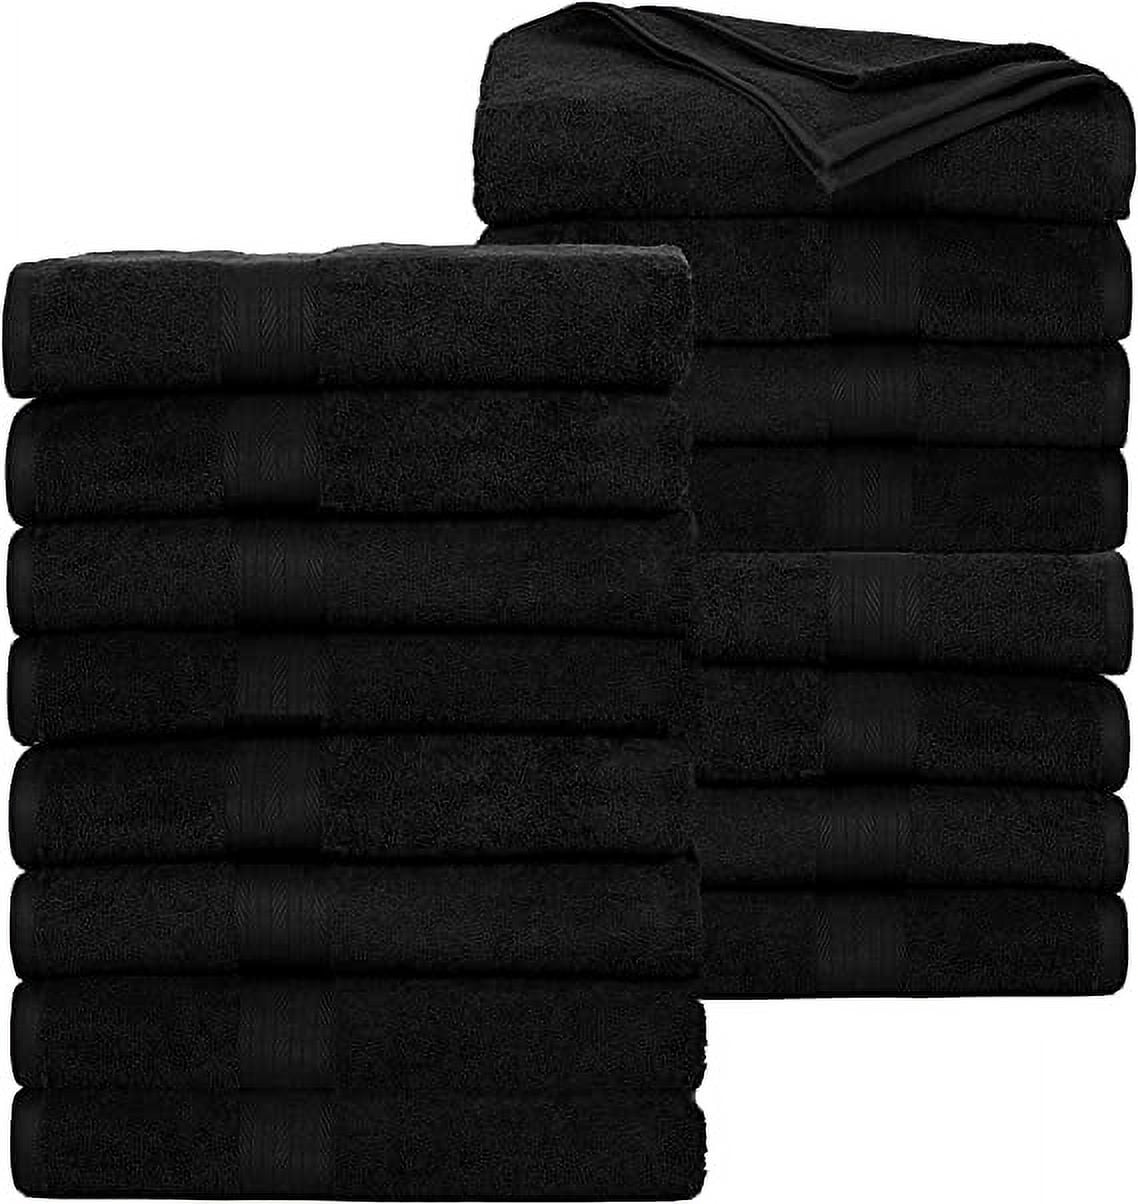  FAMILYDECOR Big Bath Towels Oversized Extra Large, Softness &  Absorbent Bath Towel (27x3966 Inch), Black and Orange Buffalo Check  Lightweight Bath Towel Sheets for Adults, Kid : Home & Kitchen